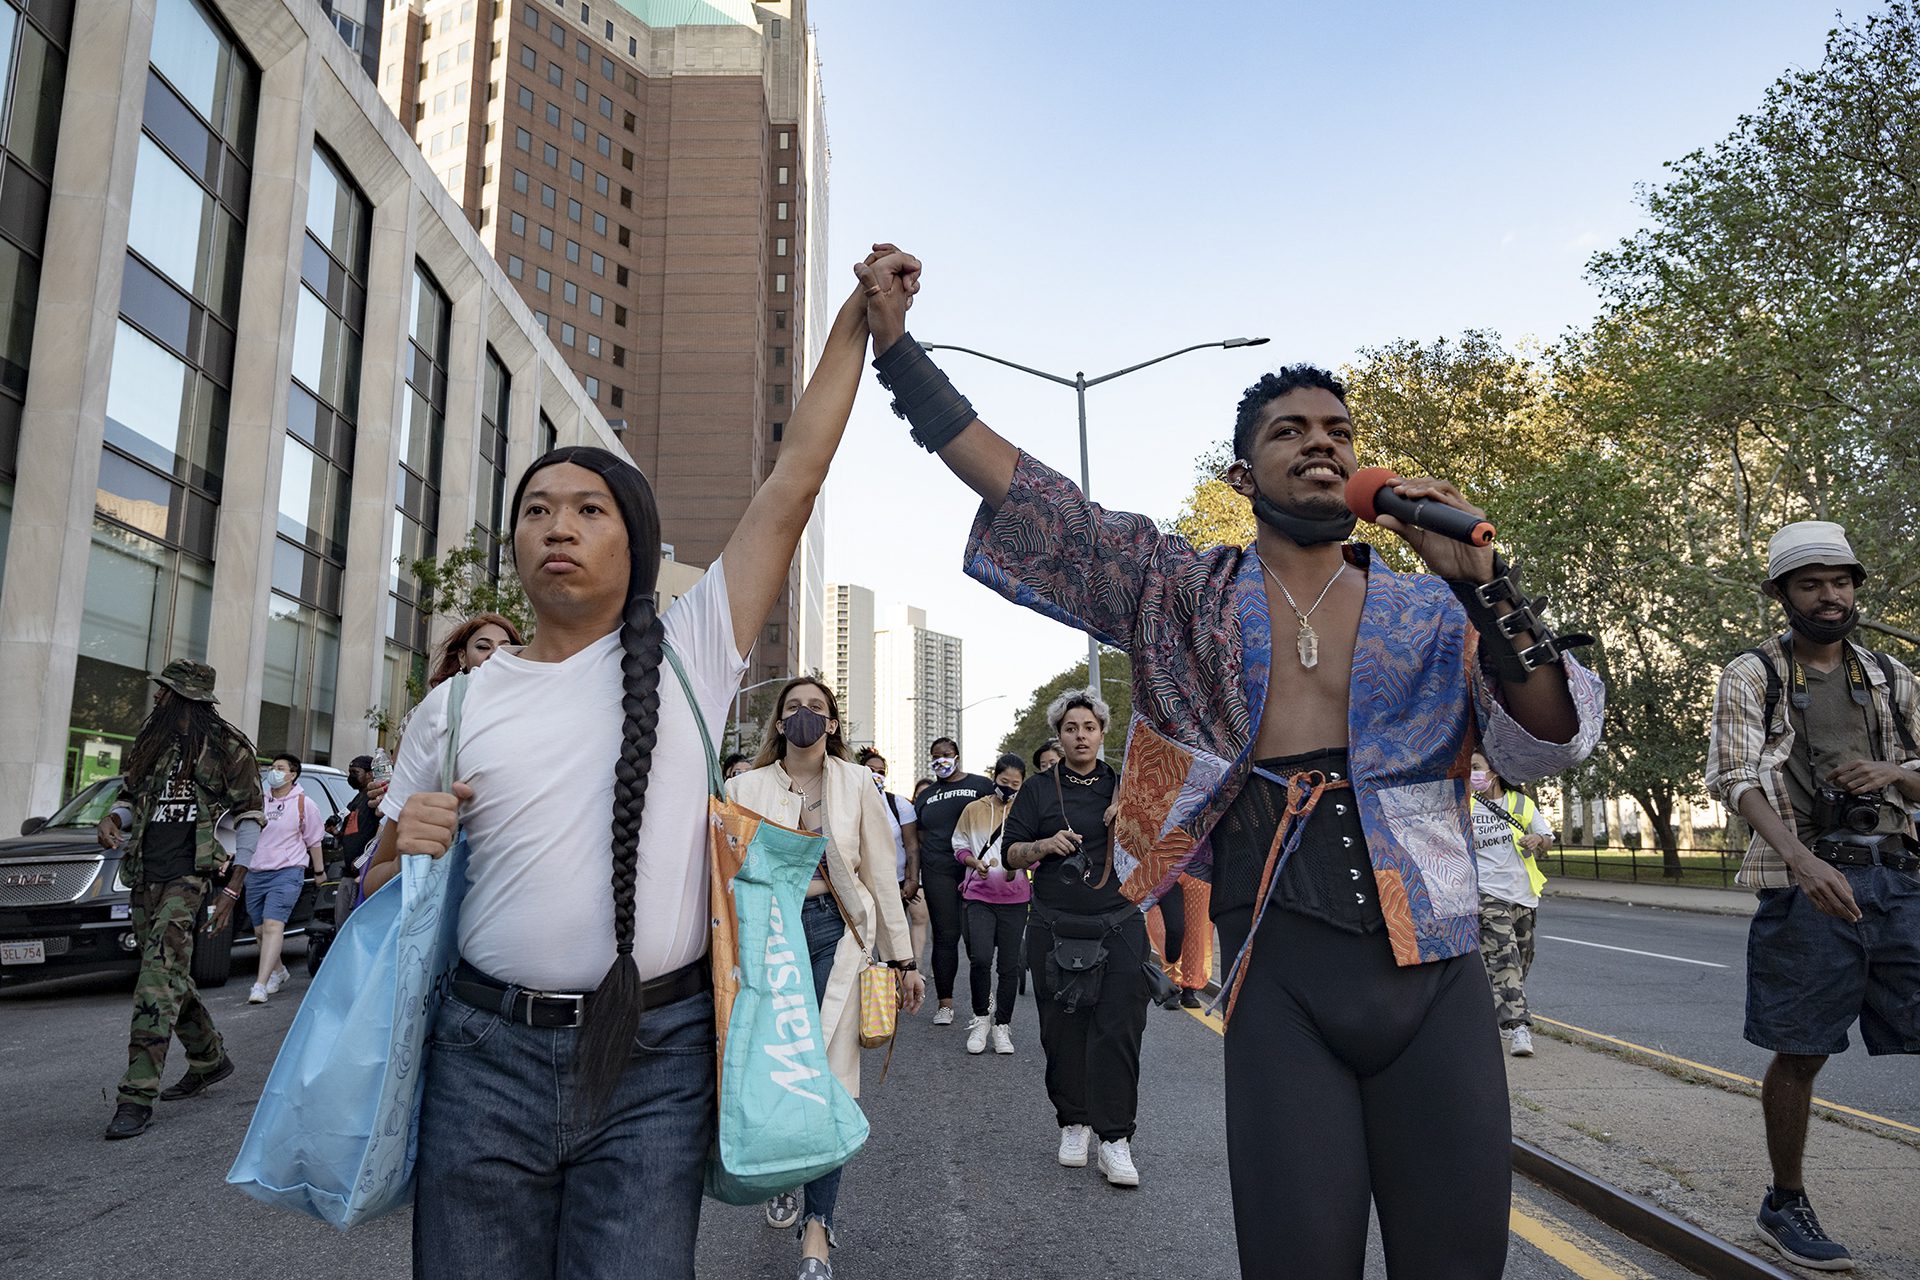 Two people holding hands in the air in solidarity